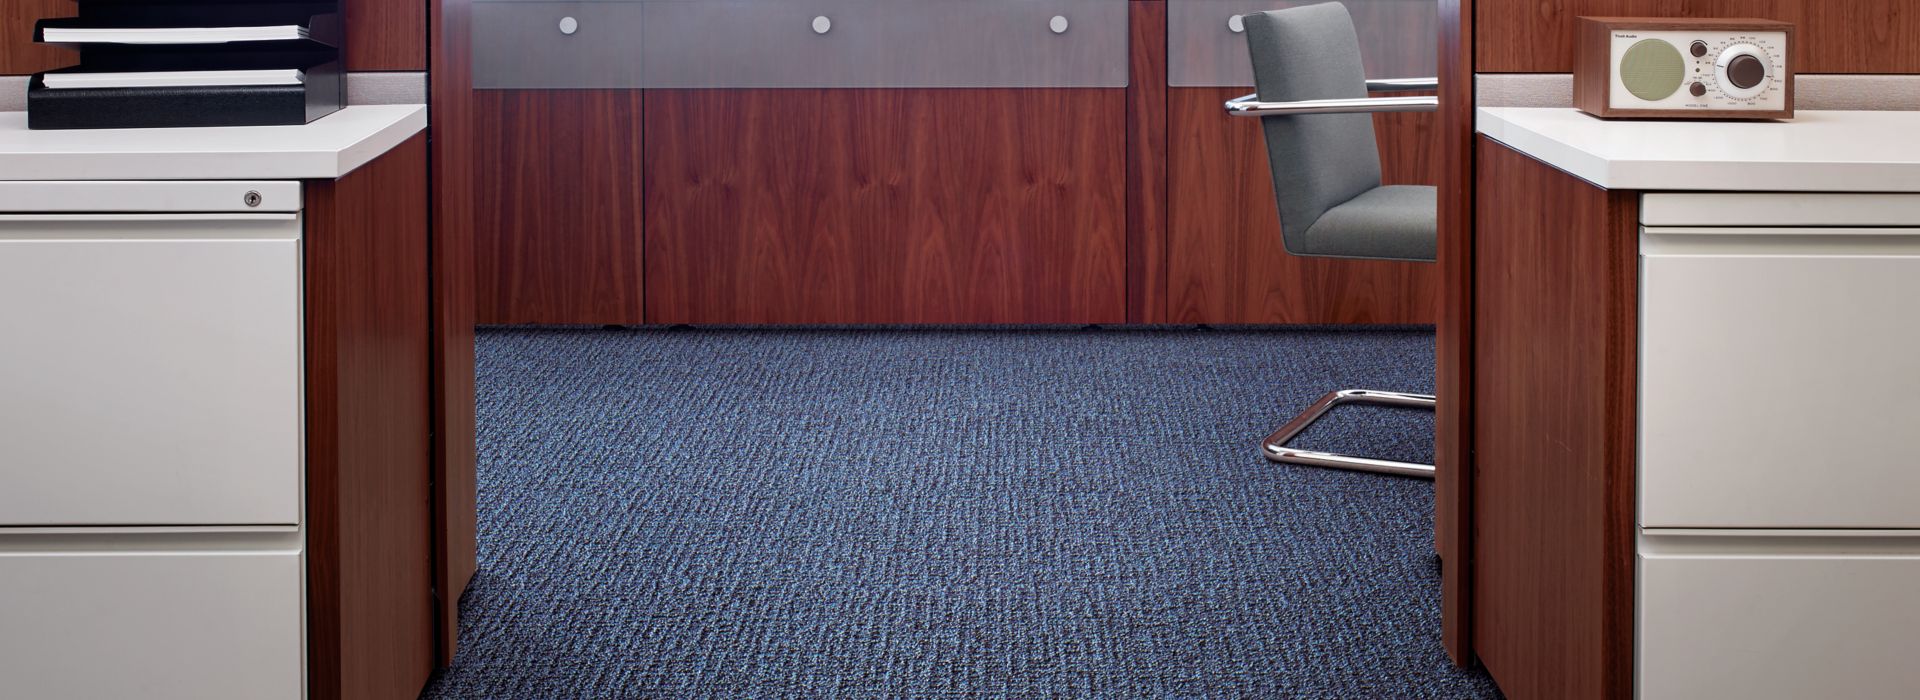 Interface Menagerie II carpet tile in office area with white cabinets and wooden cubicles